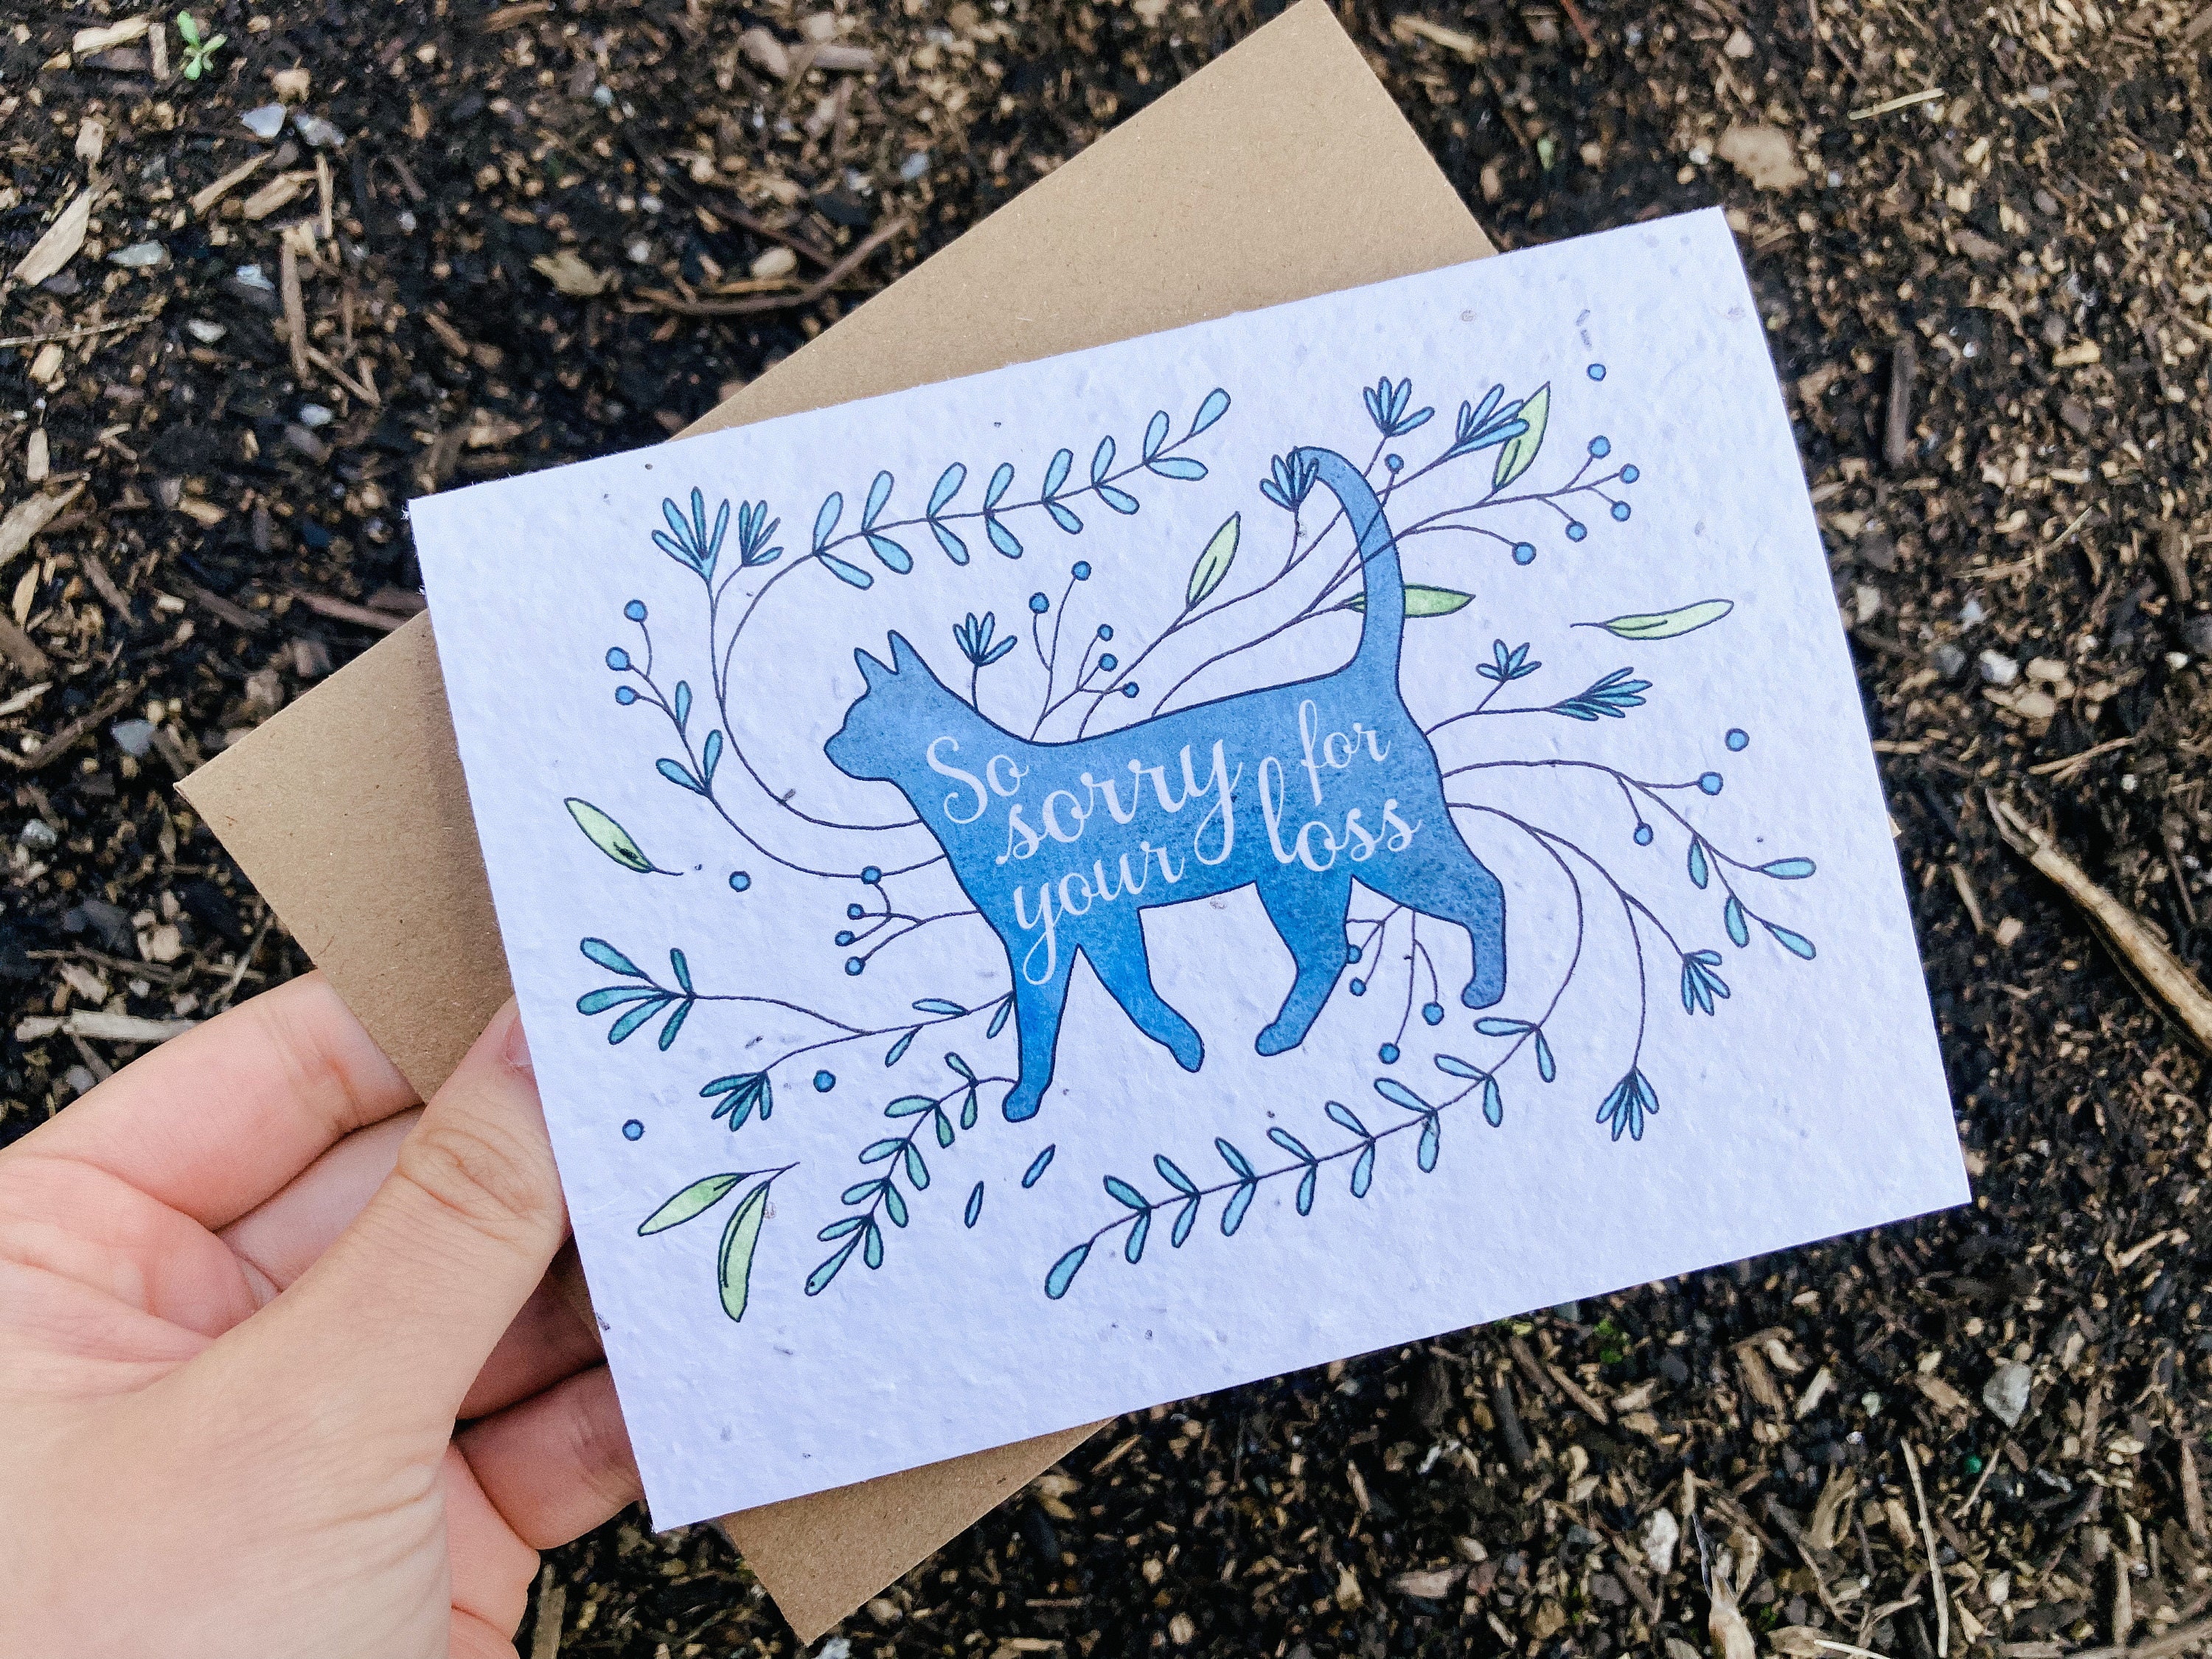 Sorry For Your Loss Card Etsy